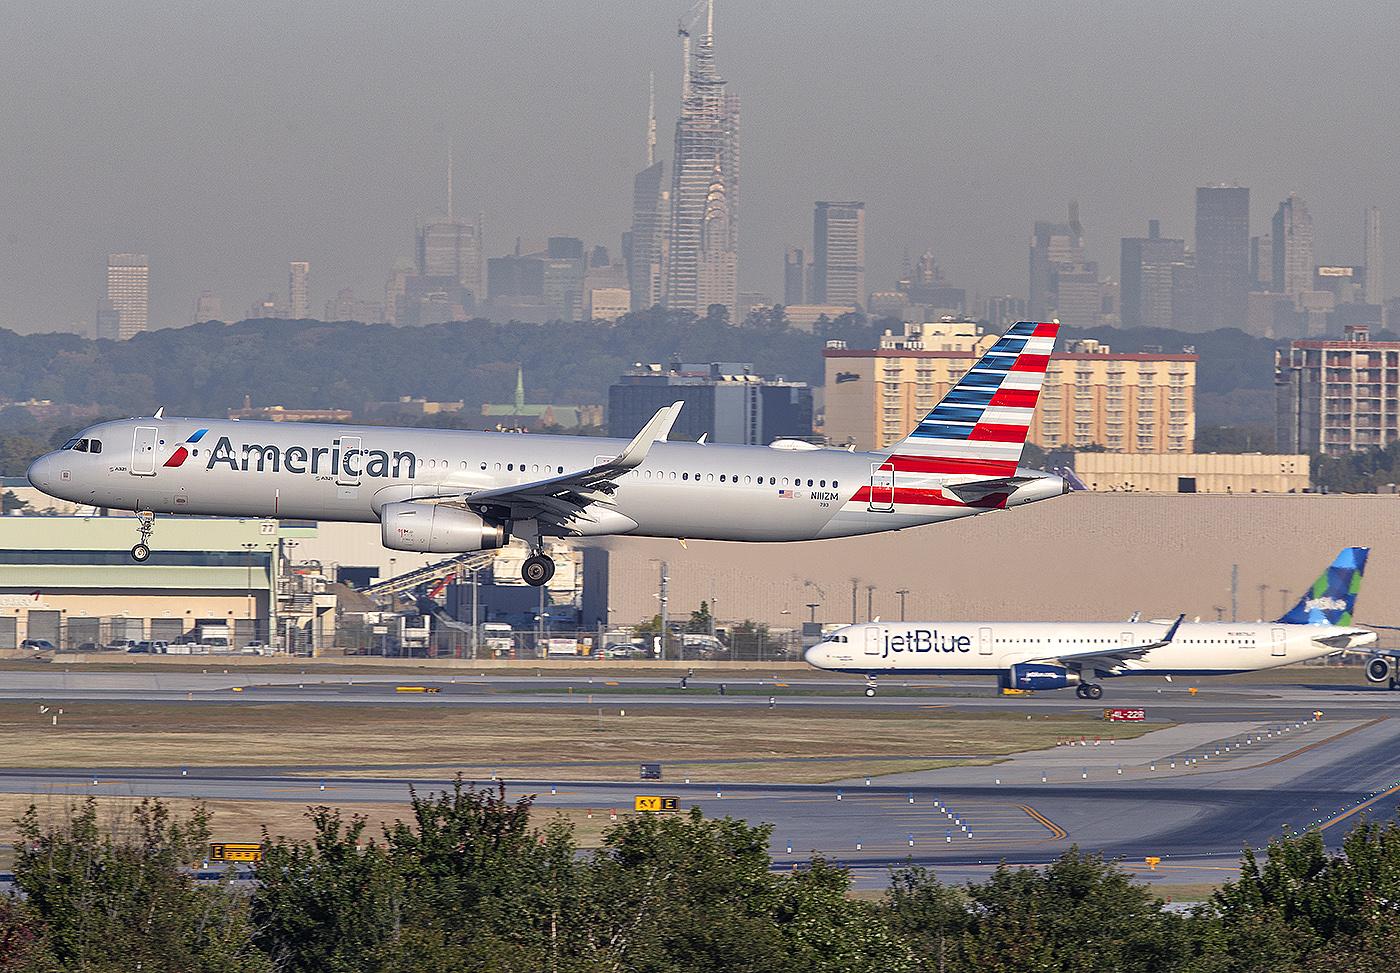 American and JetBlue